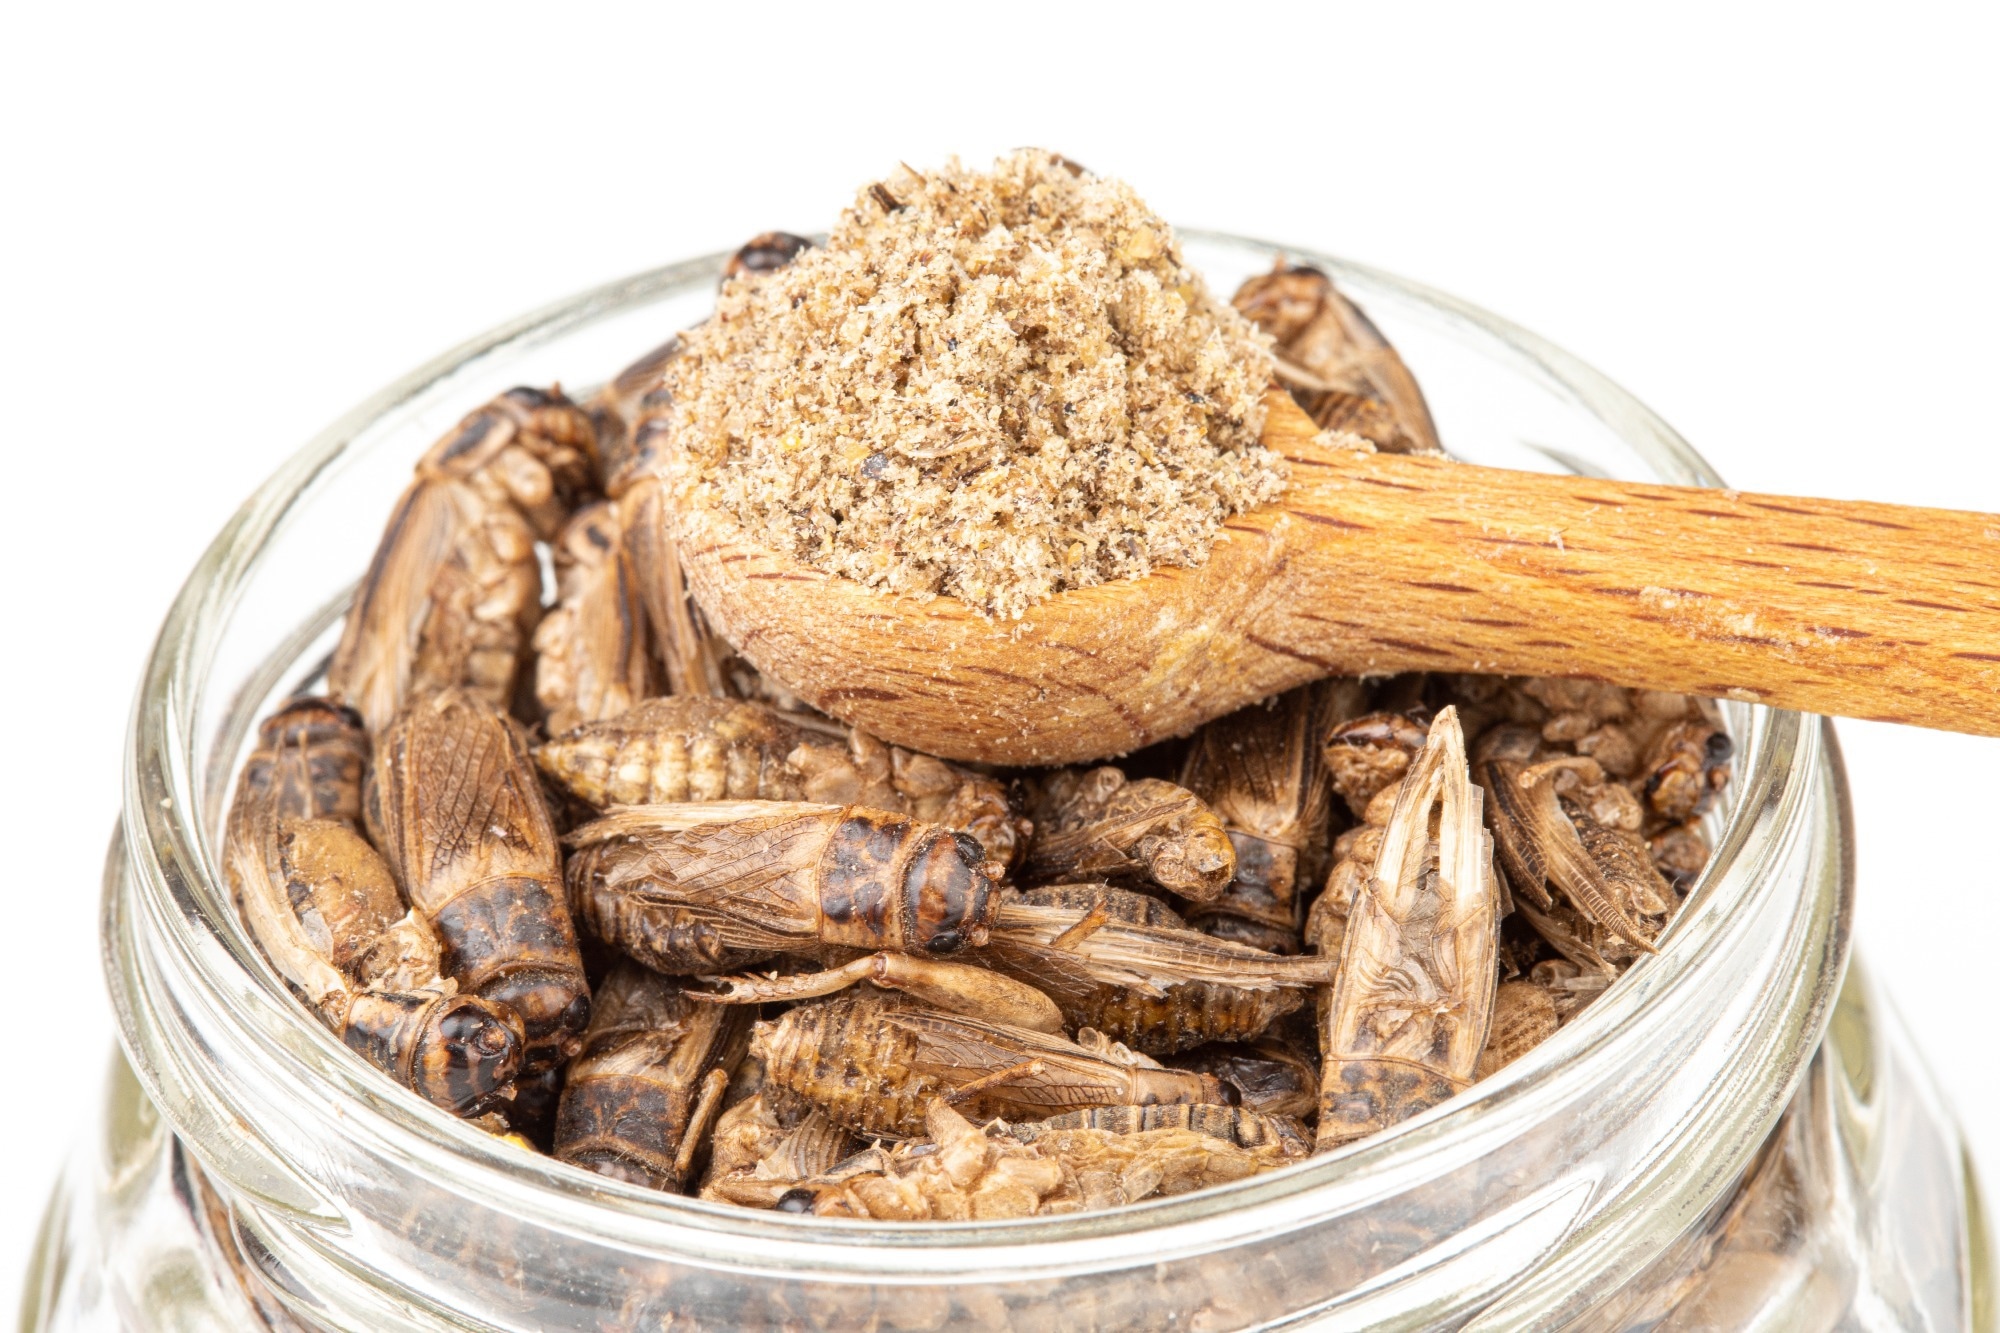 Study: Edible Insects an Alternative Nutritional Source of Bioactive Compounds: A Review. Image Credit: Giedrius Akelis / Shutterstock